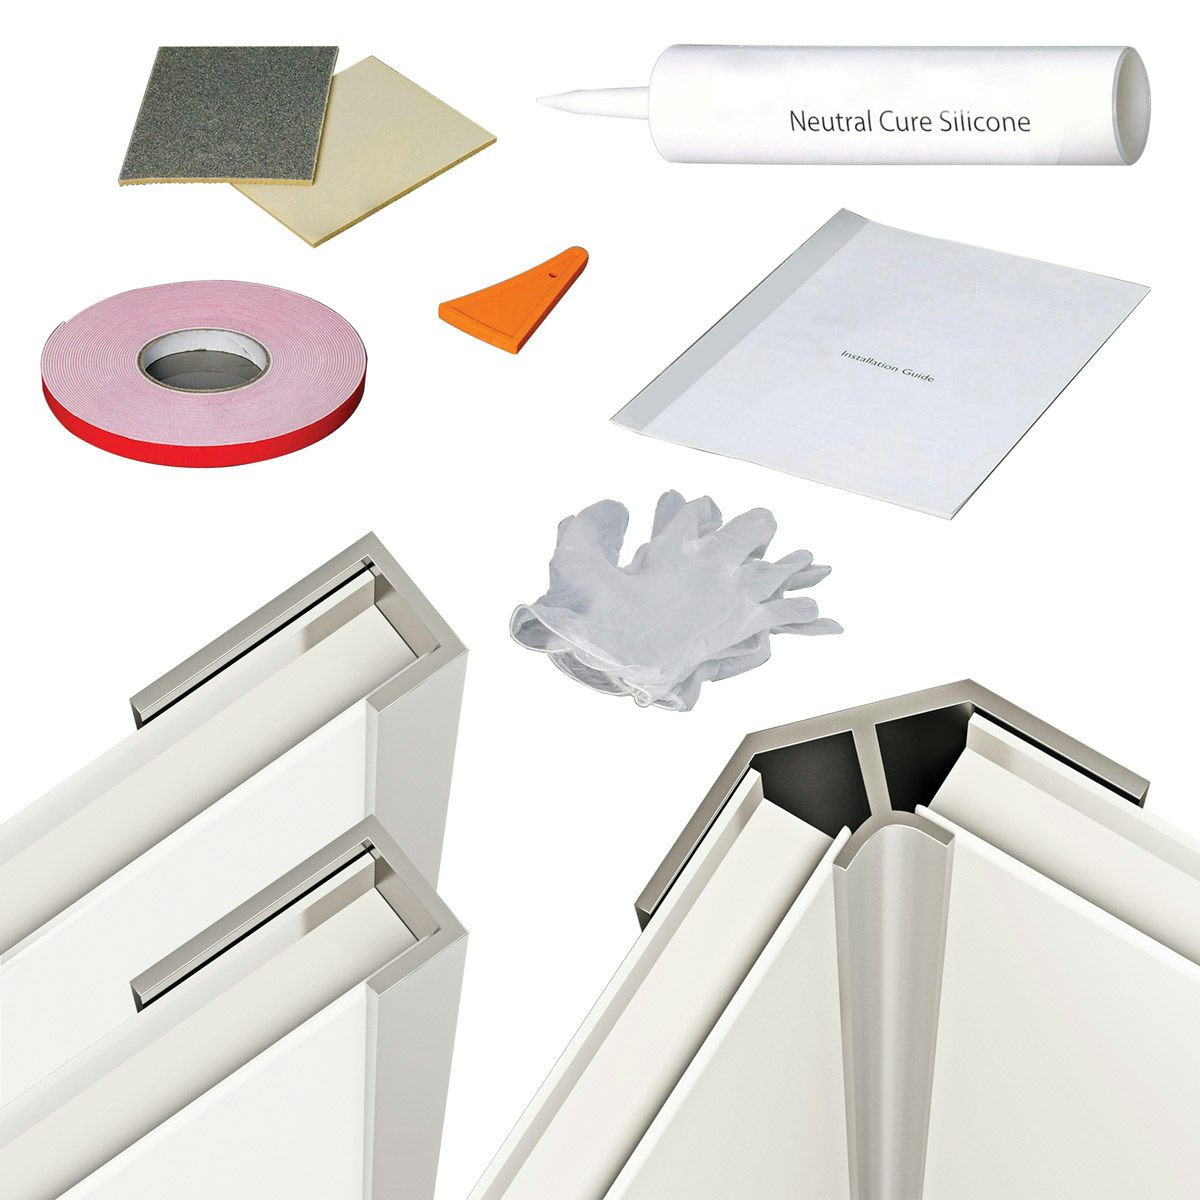 Orchard shower wall panel profile kit for corner installation